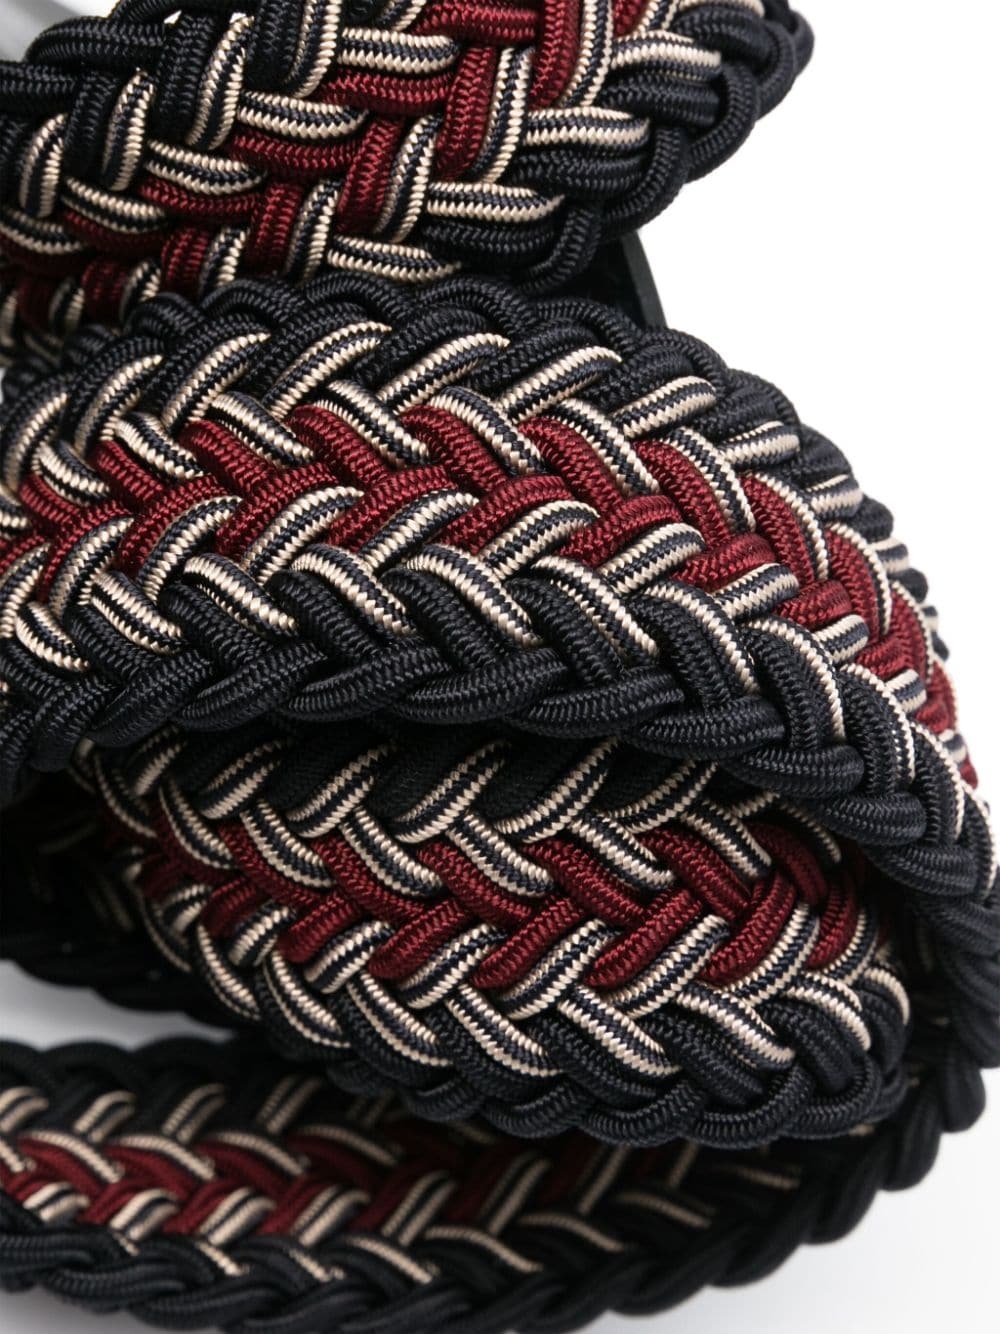 woven leather belt - 2